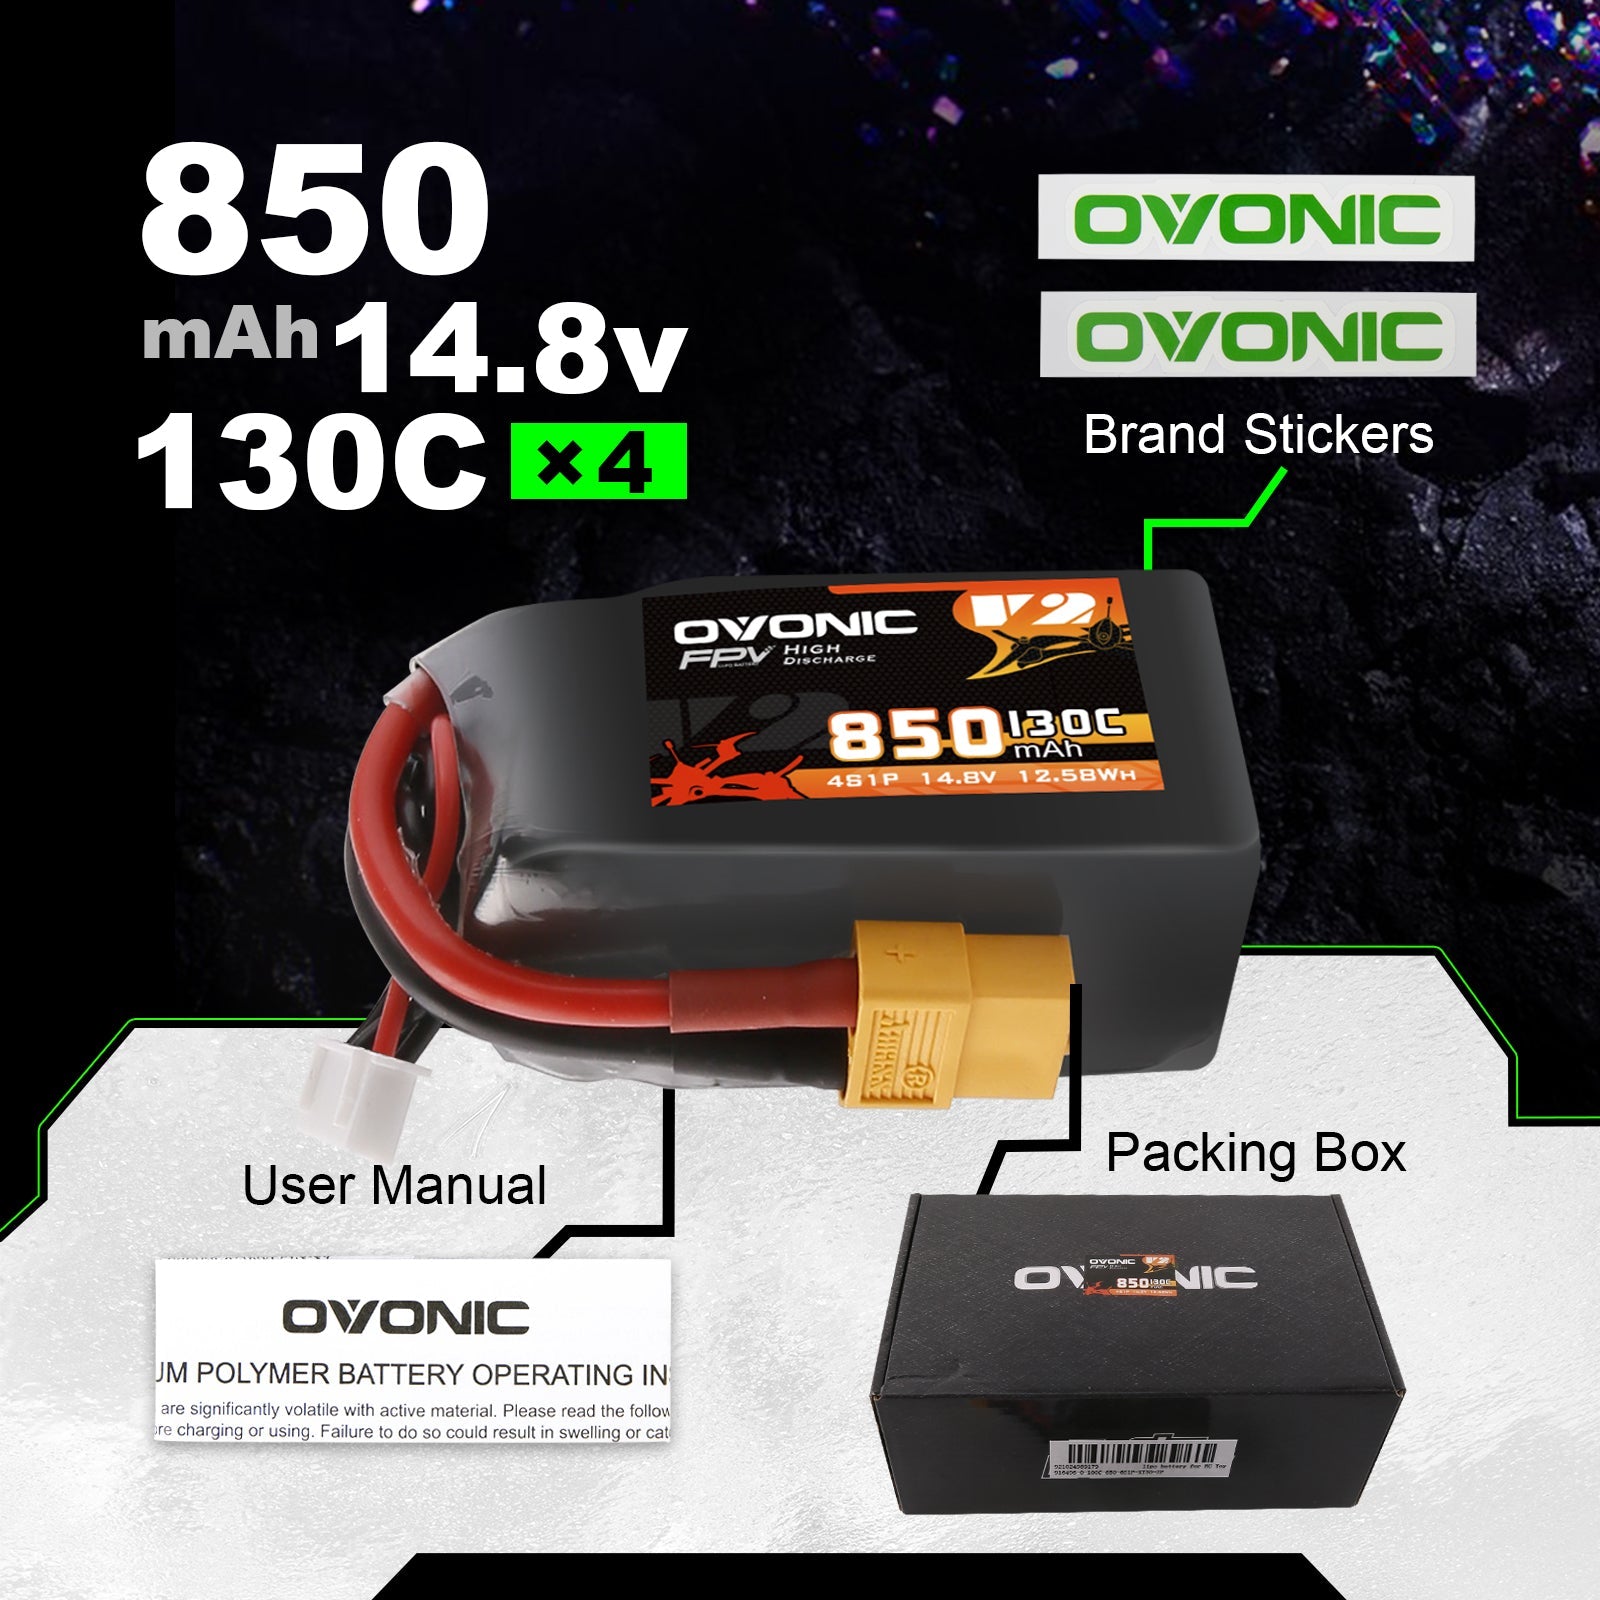 4x Ovonic 130C 4S 850mah Lipo Battery 14.8V Pack with XT60 Plug for fpv fpv drone